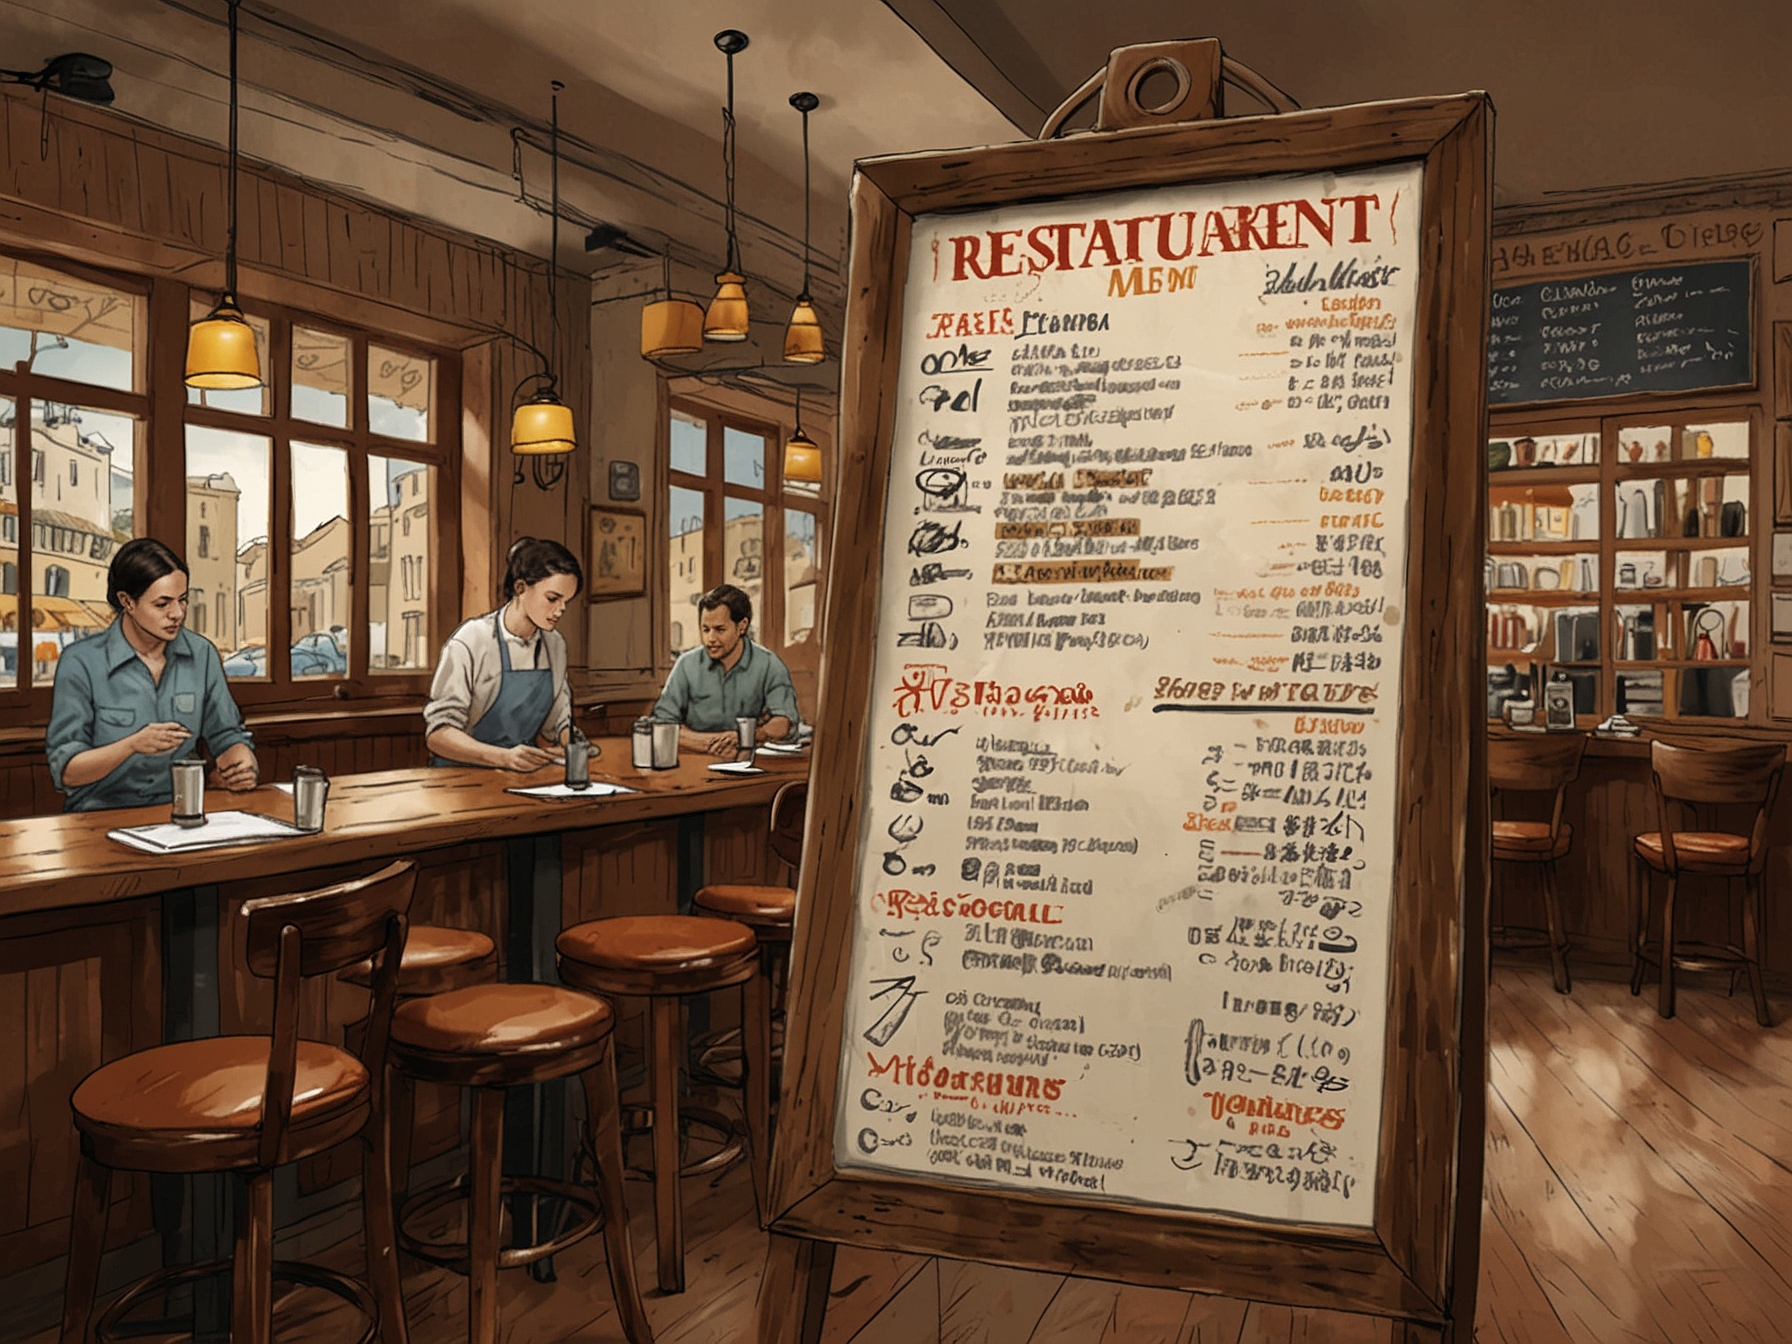 An image showing a restaurant menu with multiple languages, indicating a potential tourist trap. The illustration highlights that too many languages on a menu can signal a restaurant catering primarily to tourists.